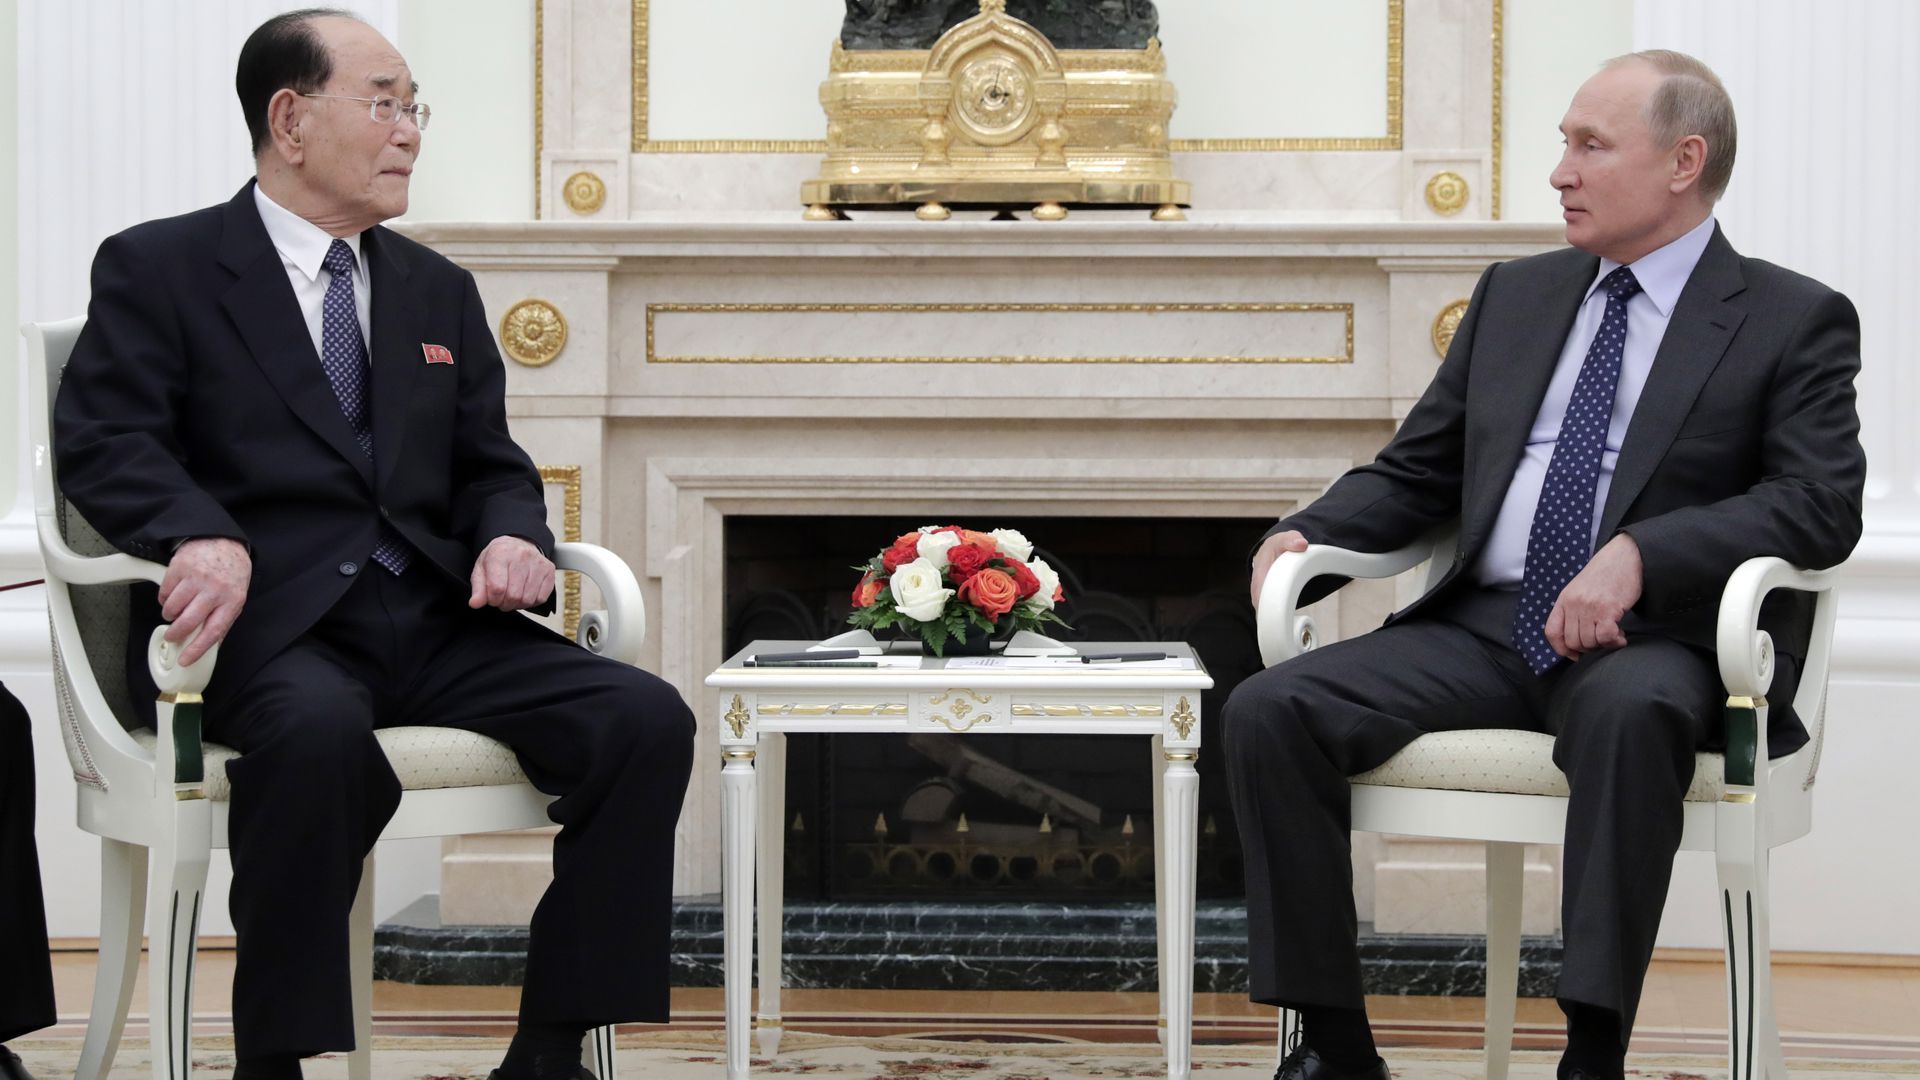 Kim Yong-nam, president of the Presidium of Supreme People's Assembly of North Korea, sits to the left of Russian President Vladimir Putin